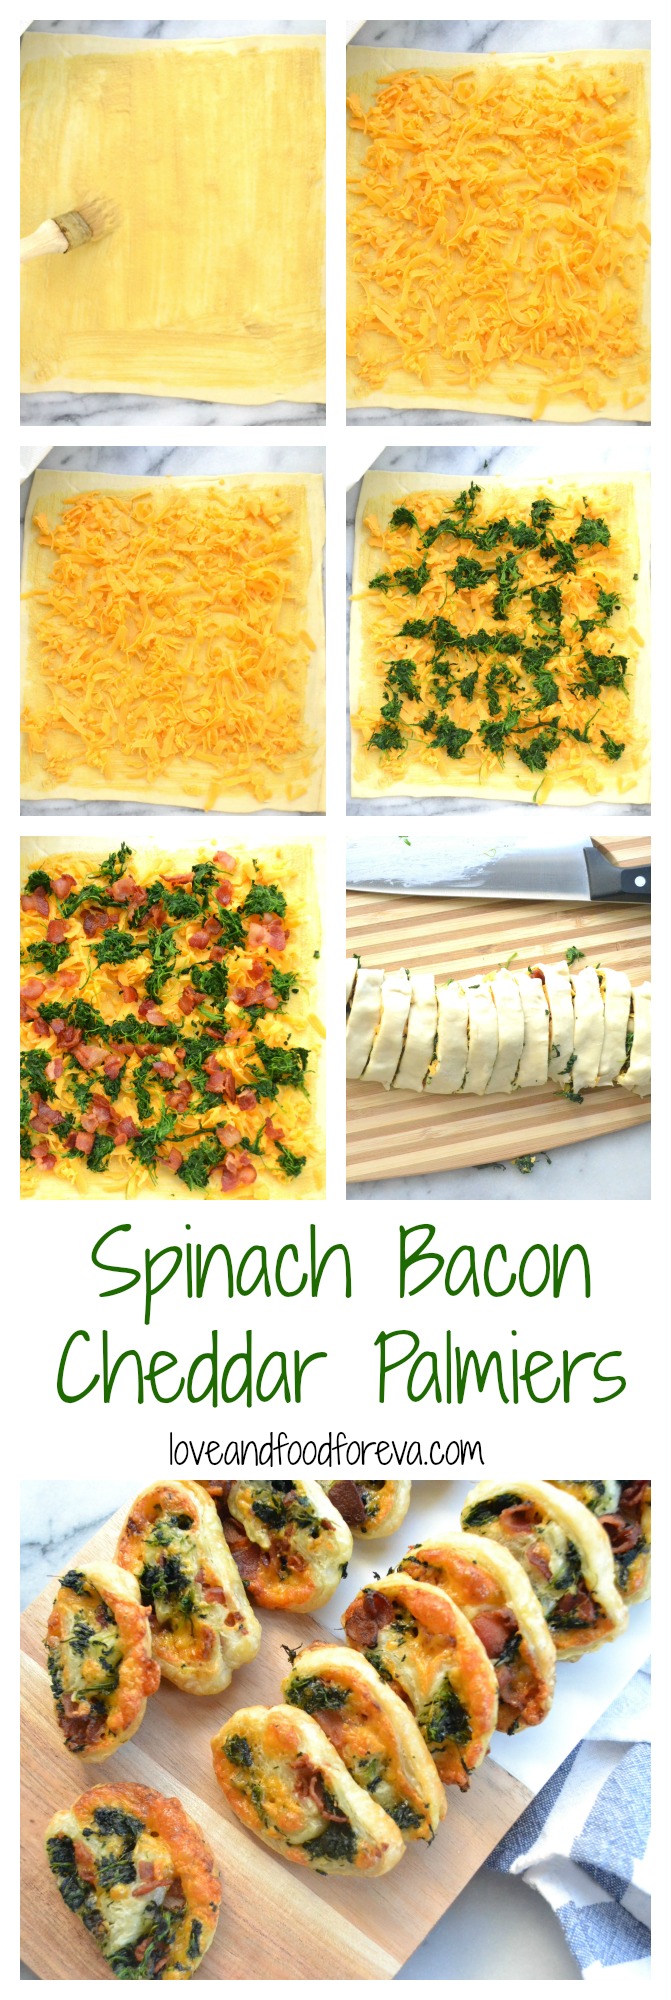 Spinach Bacon Cheddar Palmiers - the perfect bite size dish for cocktail parties!